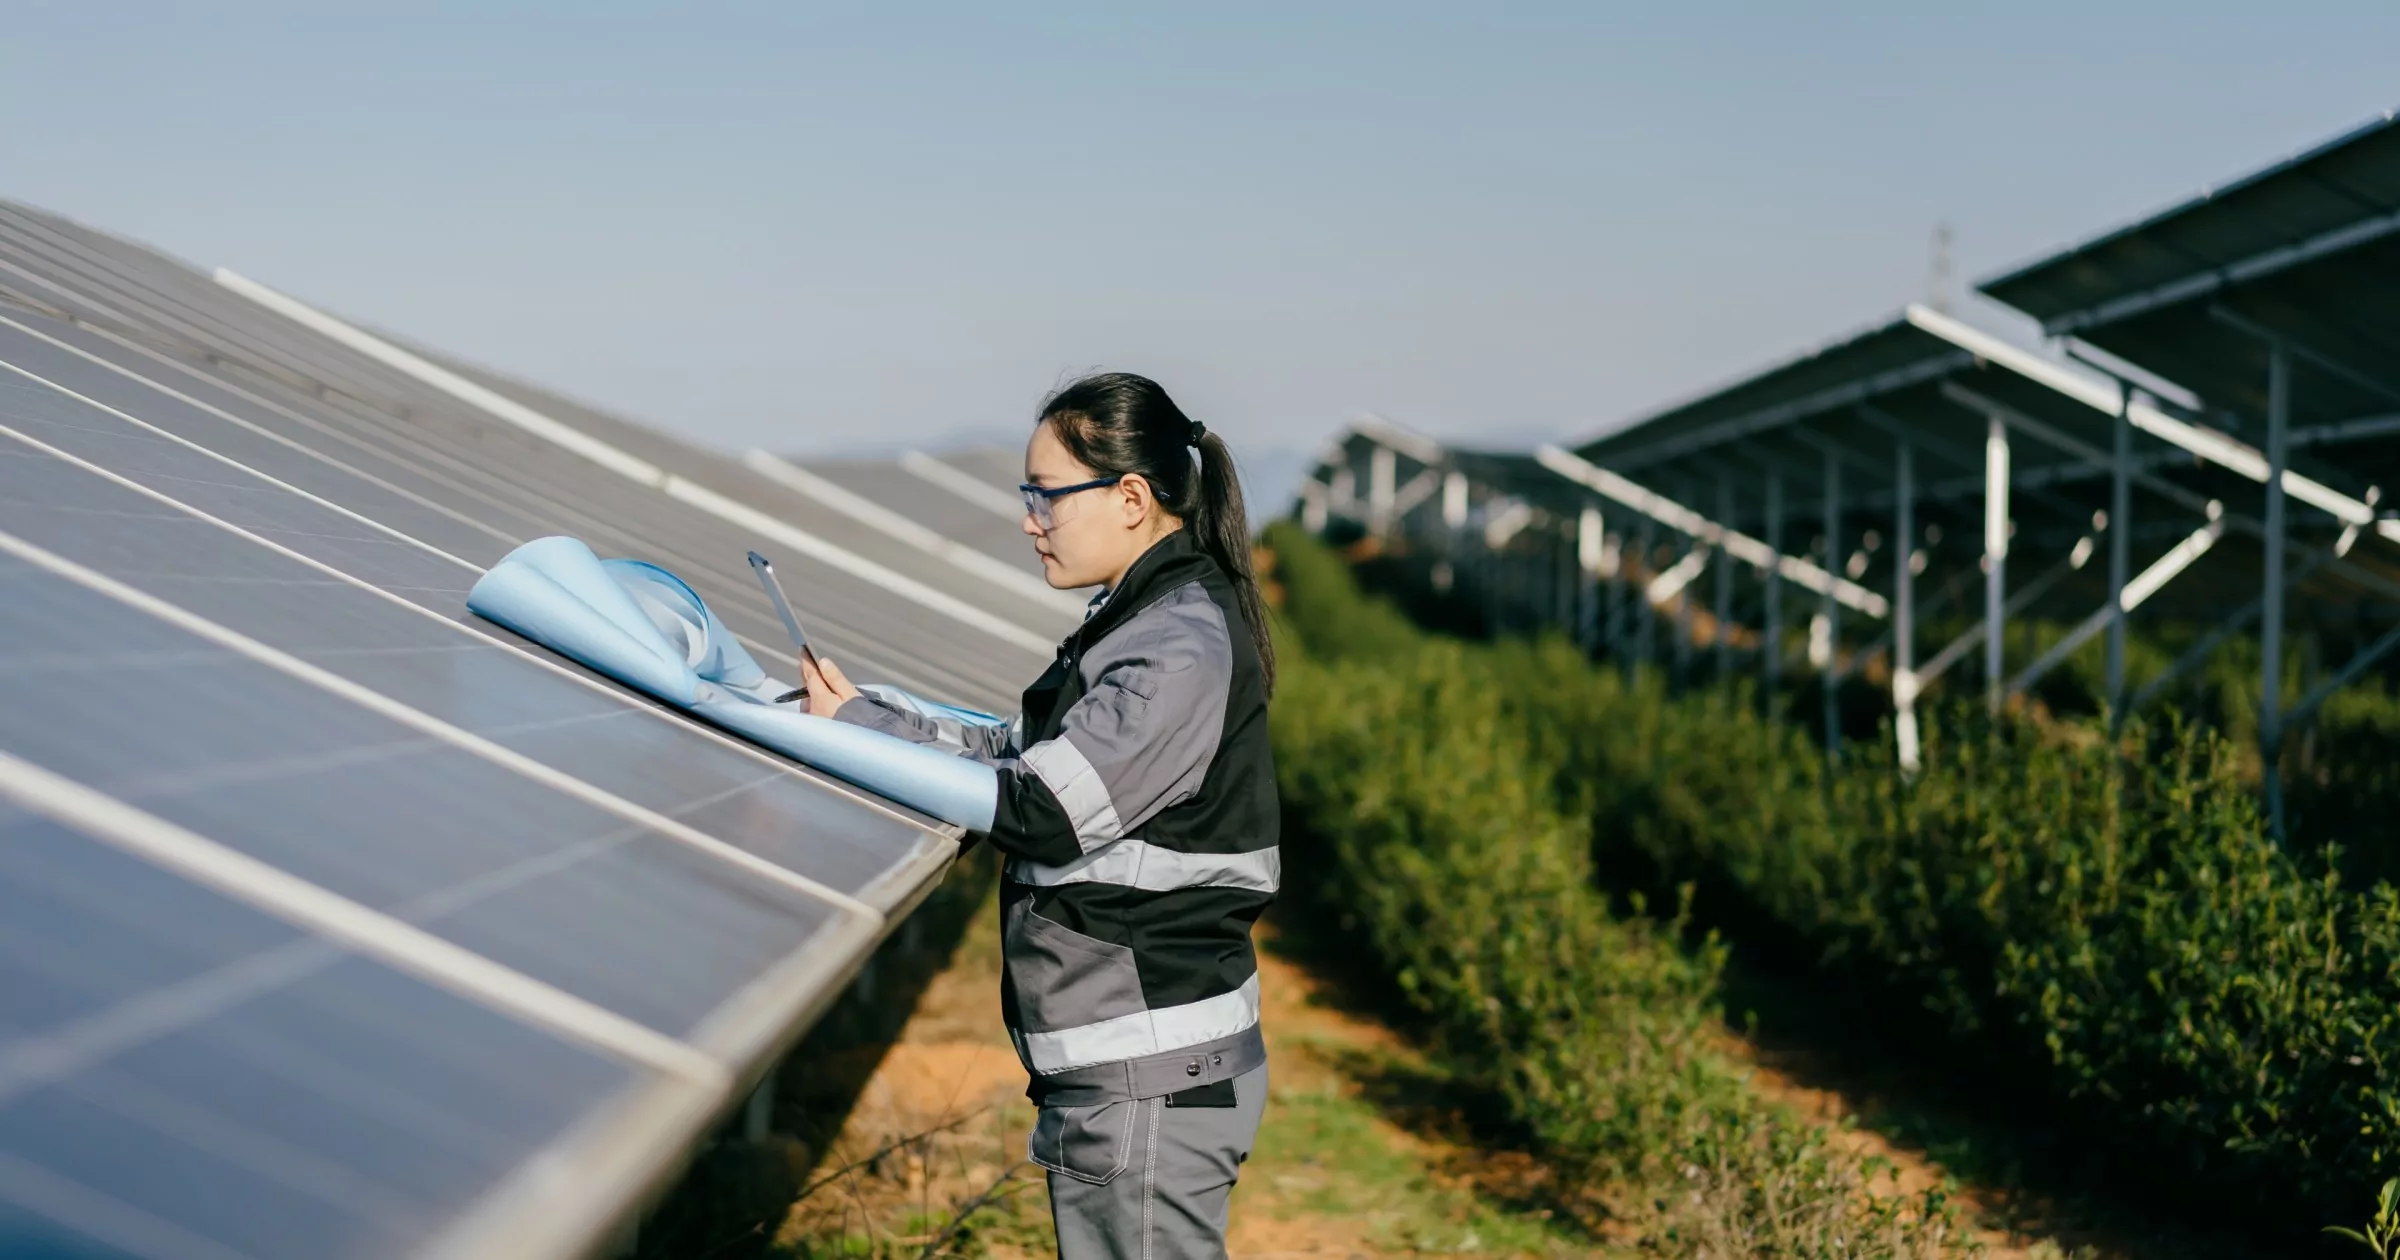 Engineer working in field among solar grids